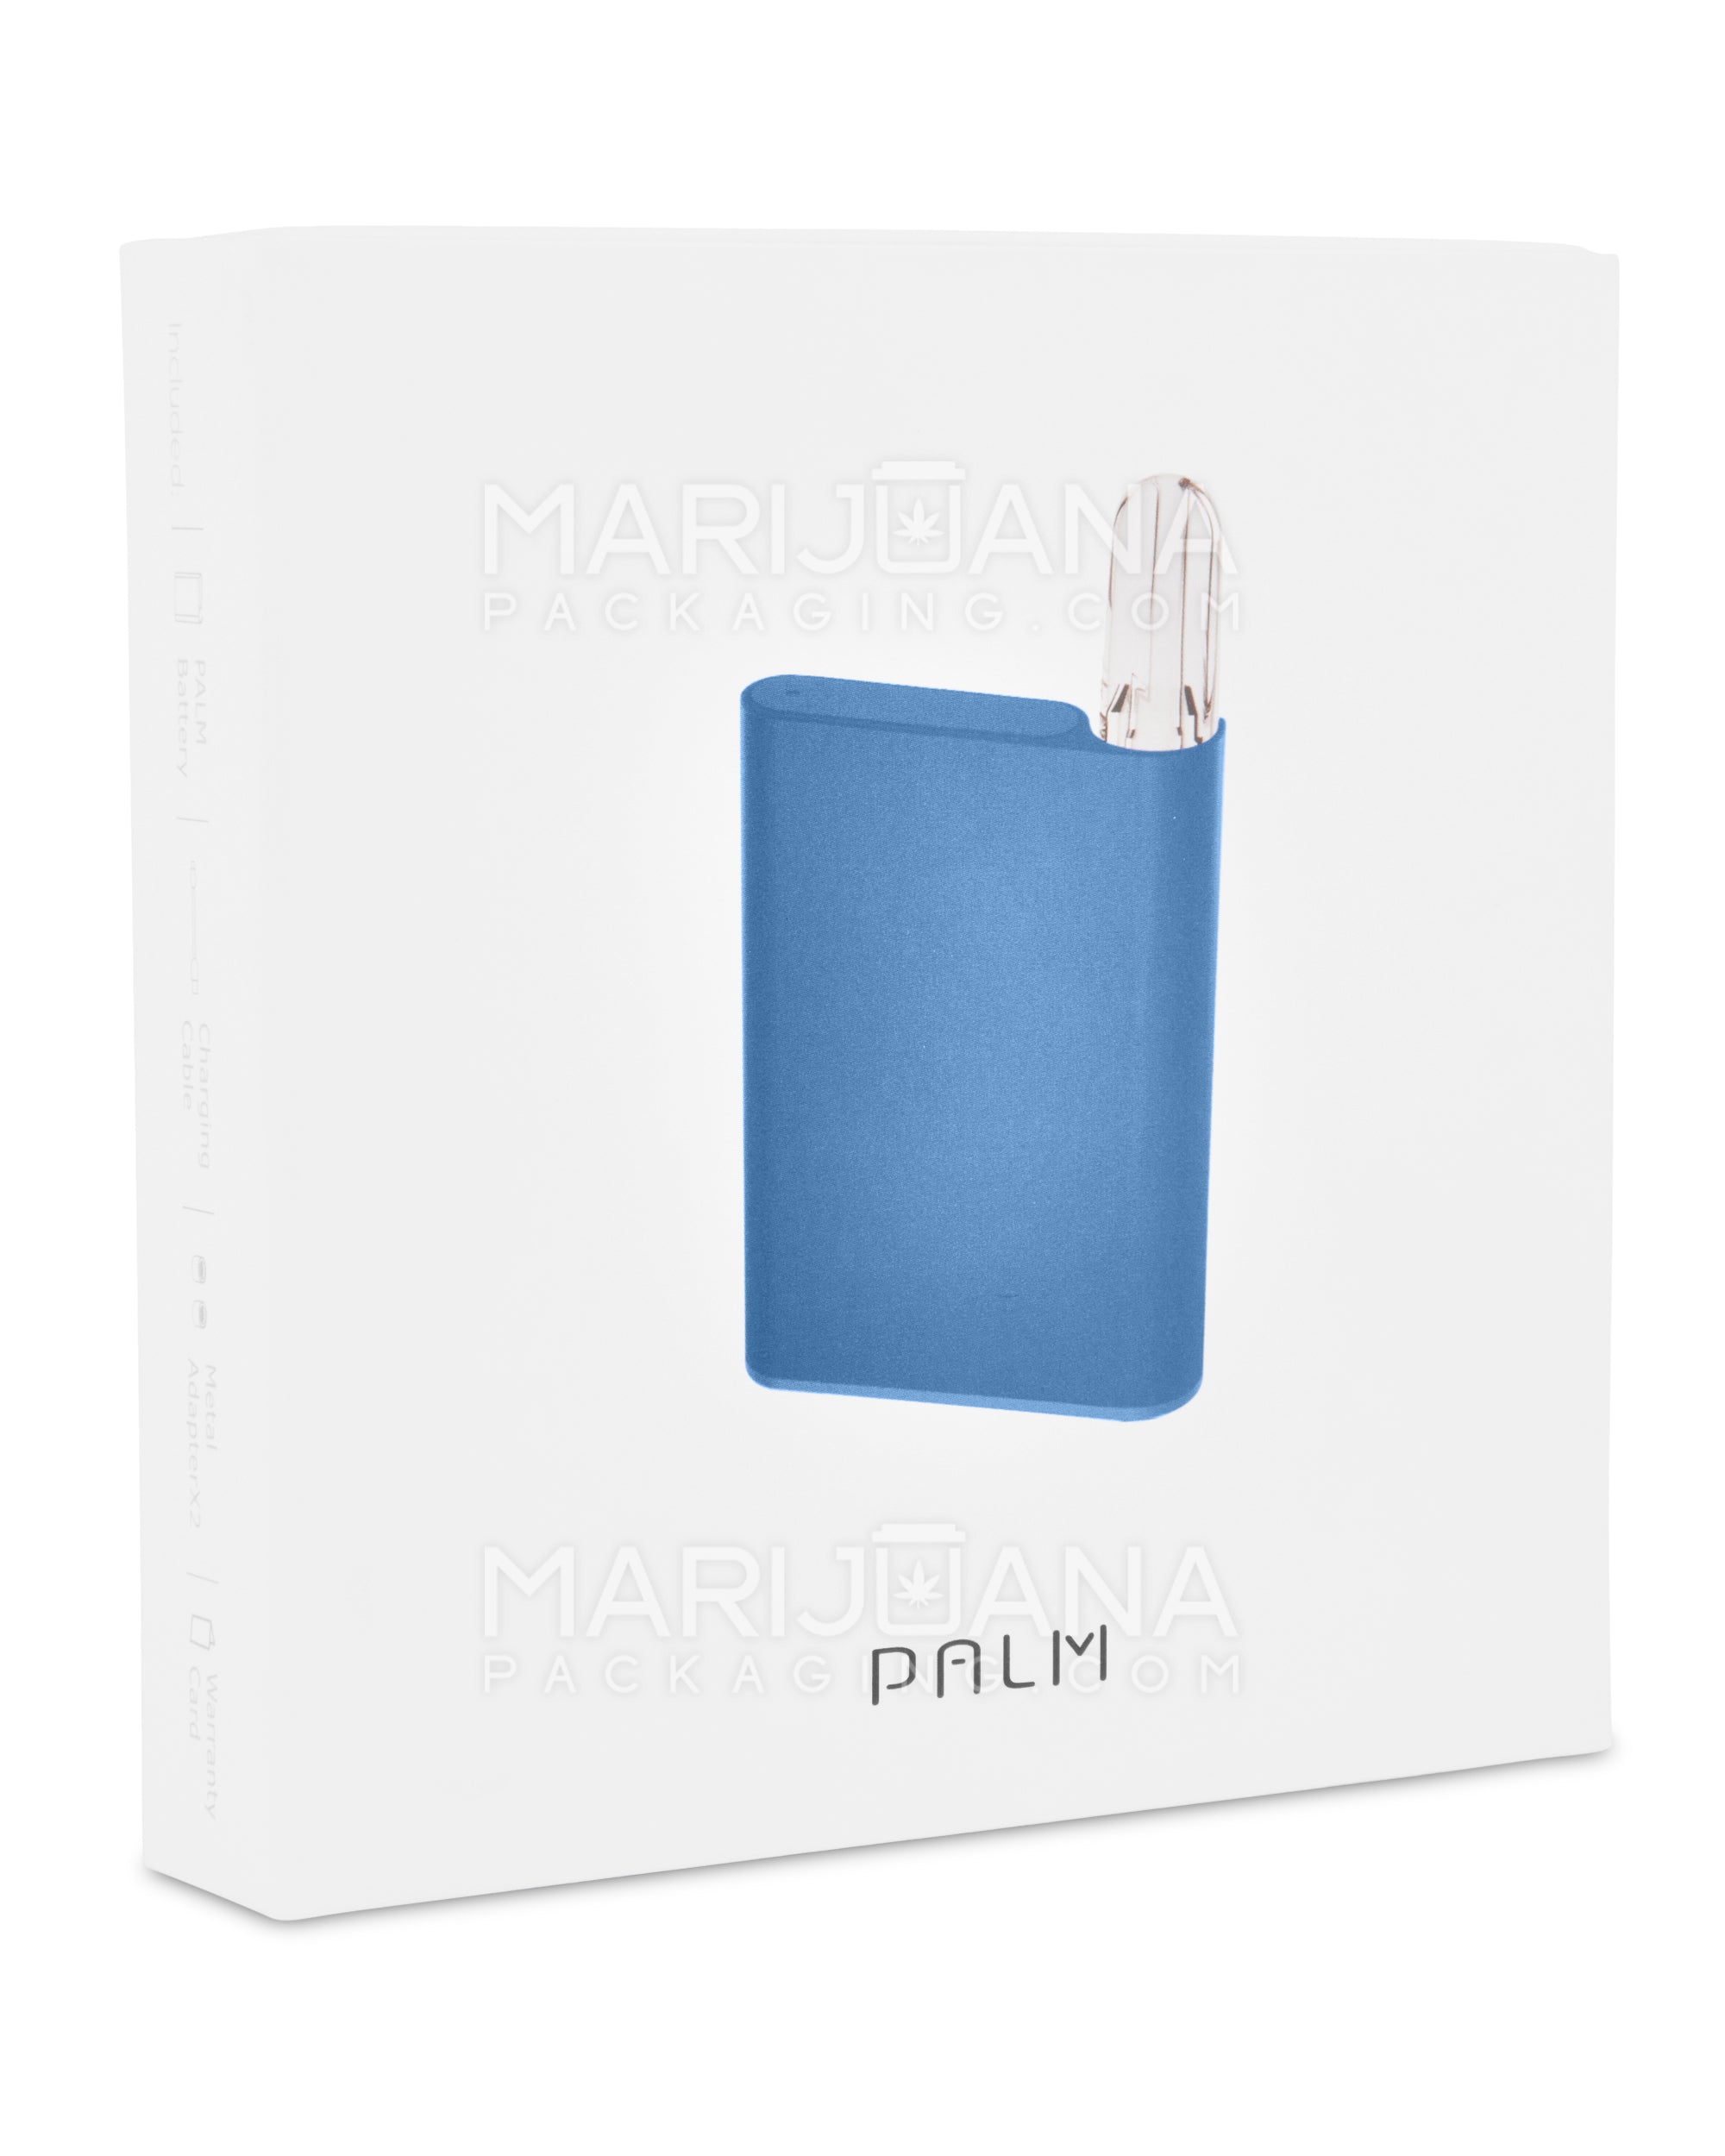 CCELL | Palm Vape Battery with USB Charger | 500mAh - Blue - 510 Thread - 8